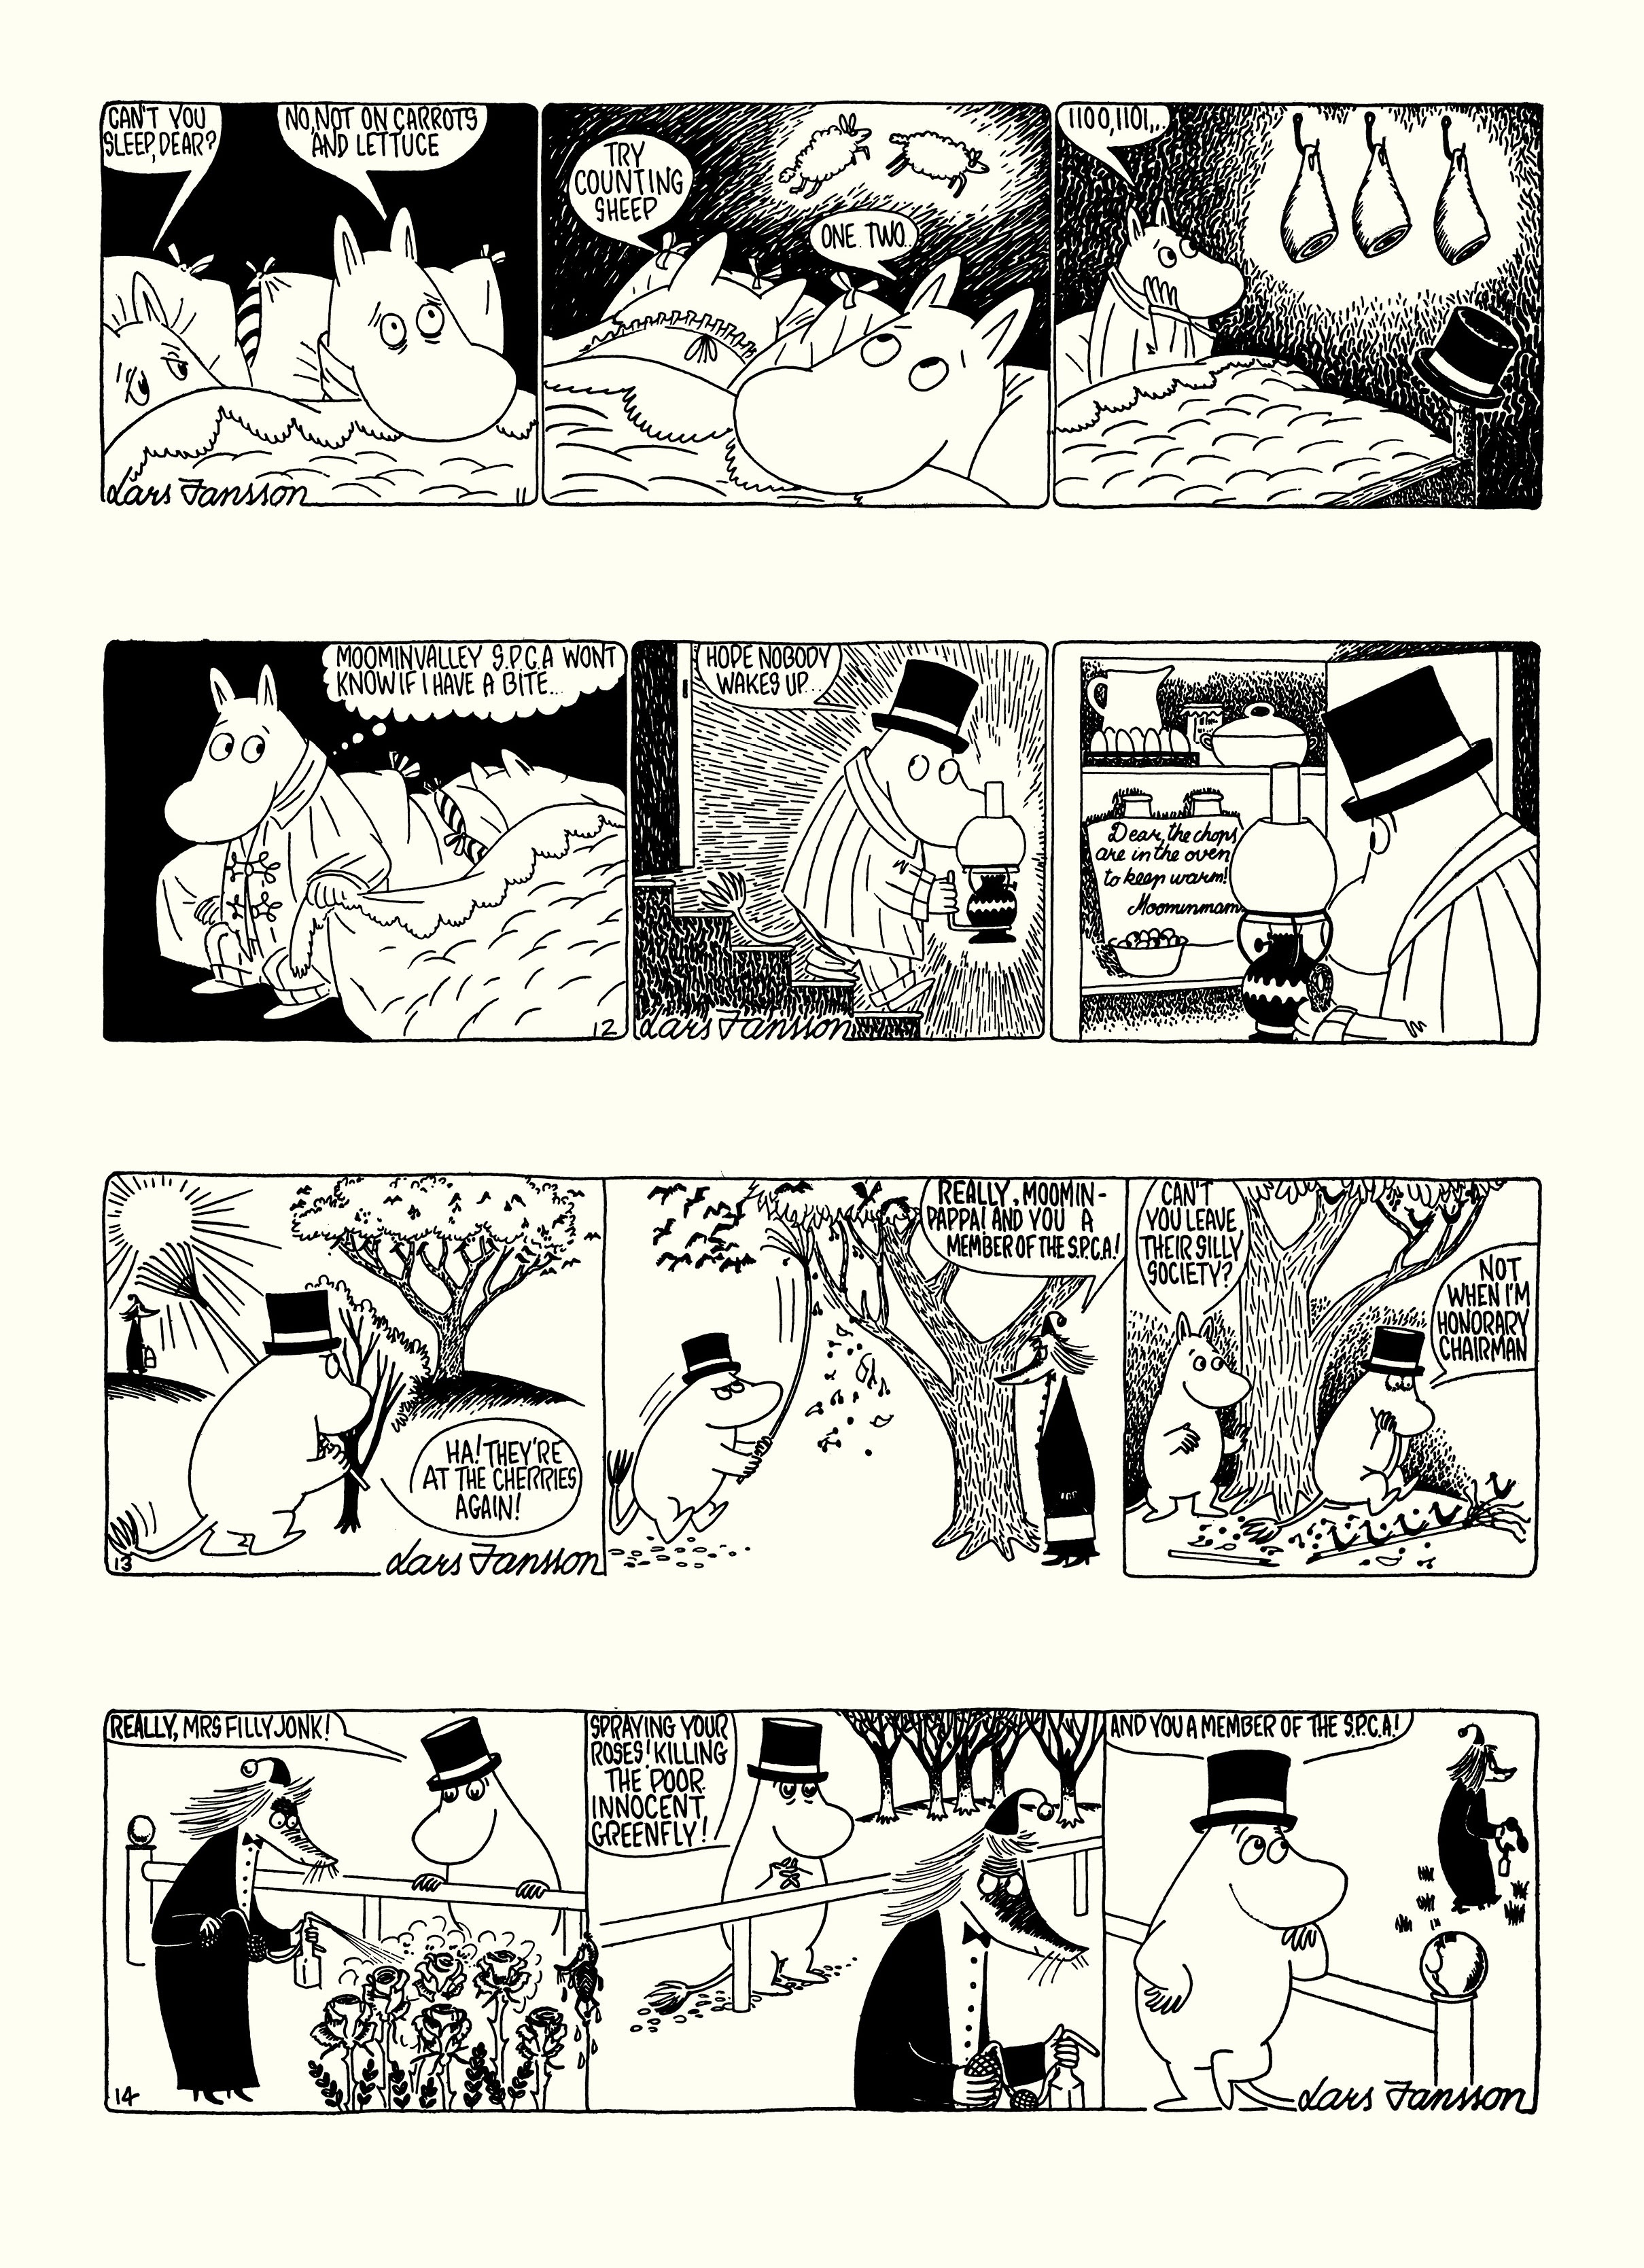 Read online Moomin: The Complete Lars Jansson Comic Strip comic -  Issue # TPB 6 - 71